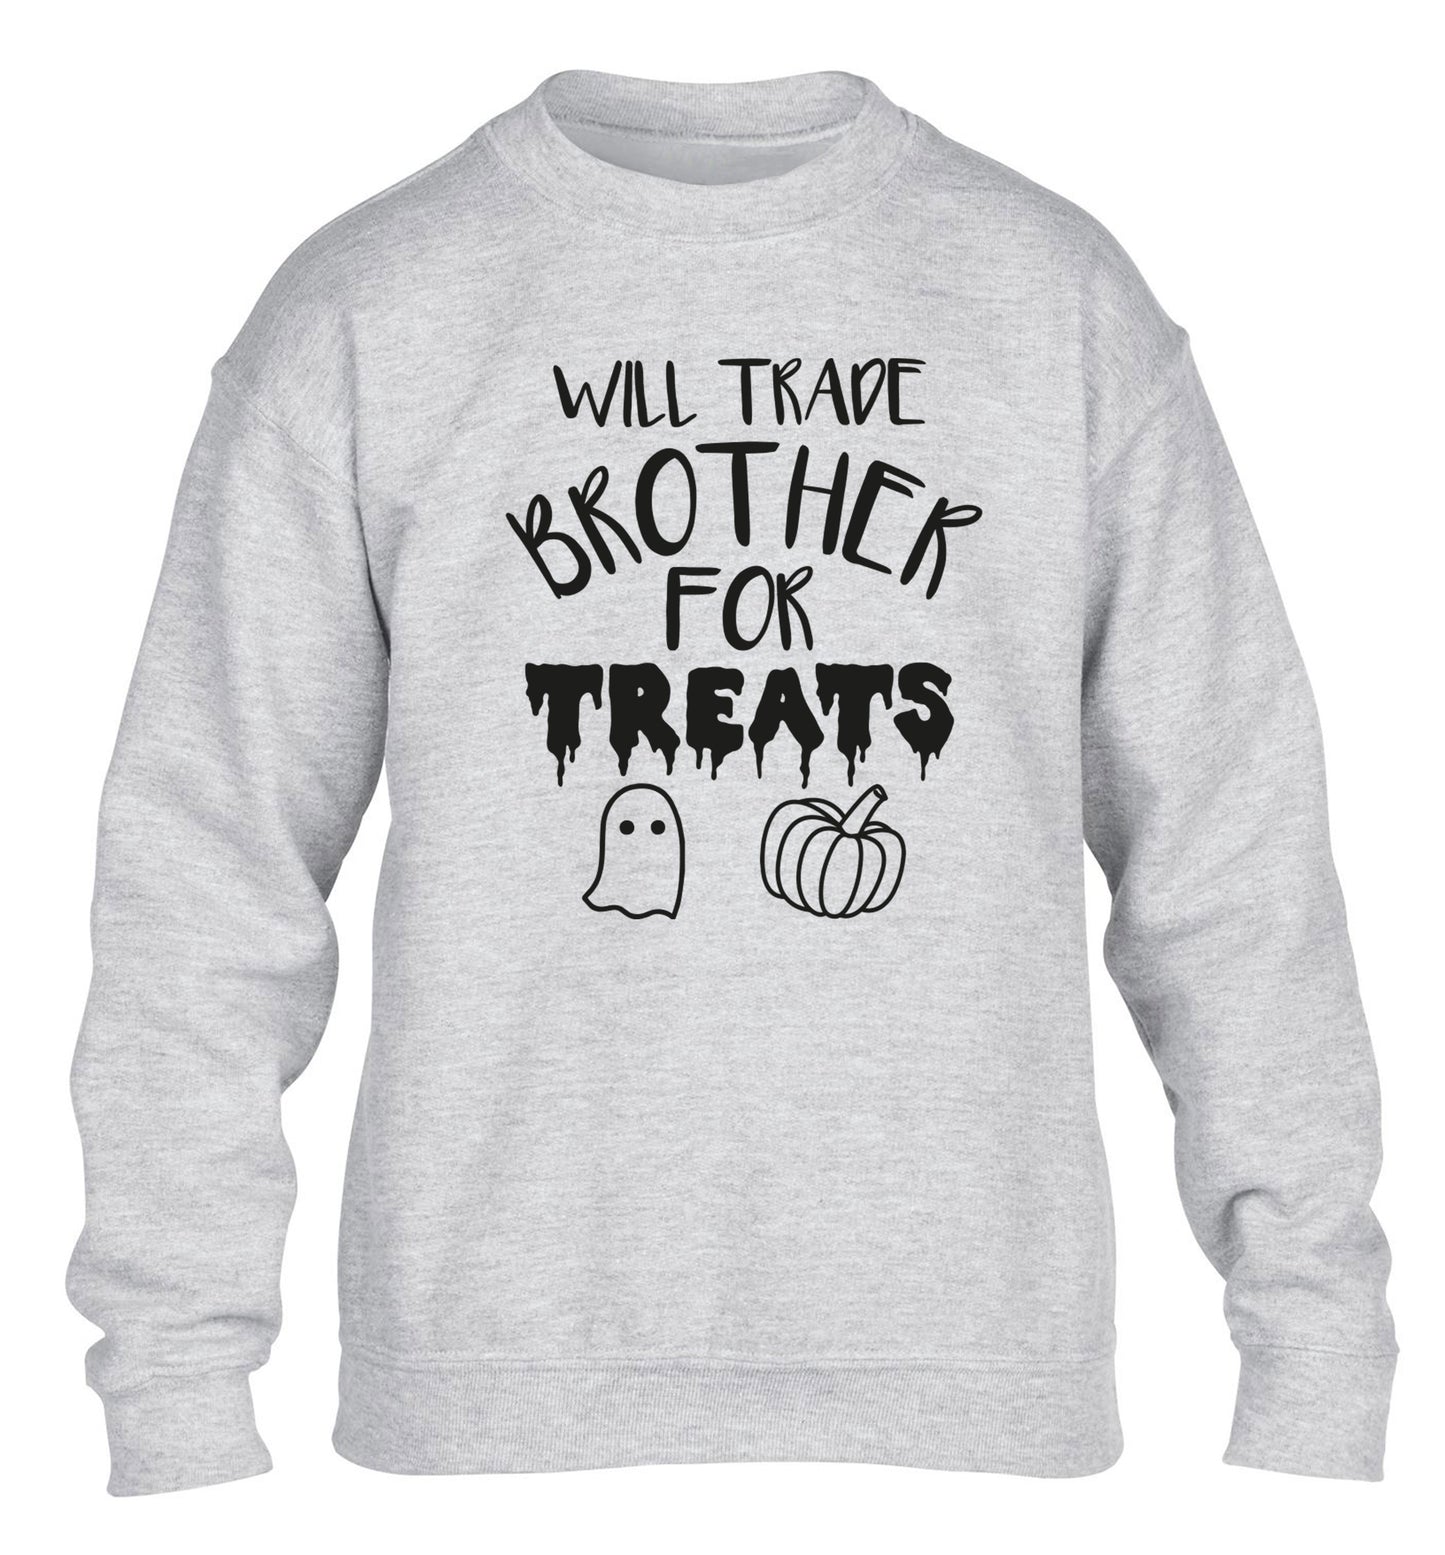 Will trade brother for treats children's grey sweater 12-14 Years